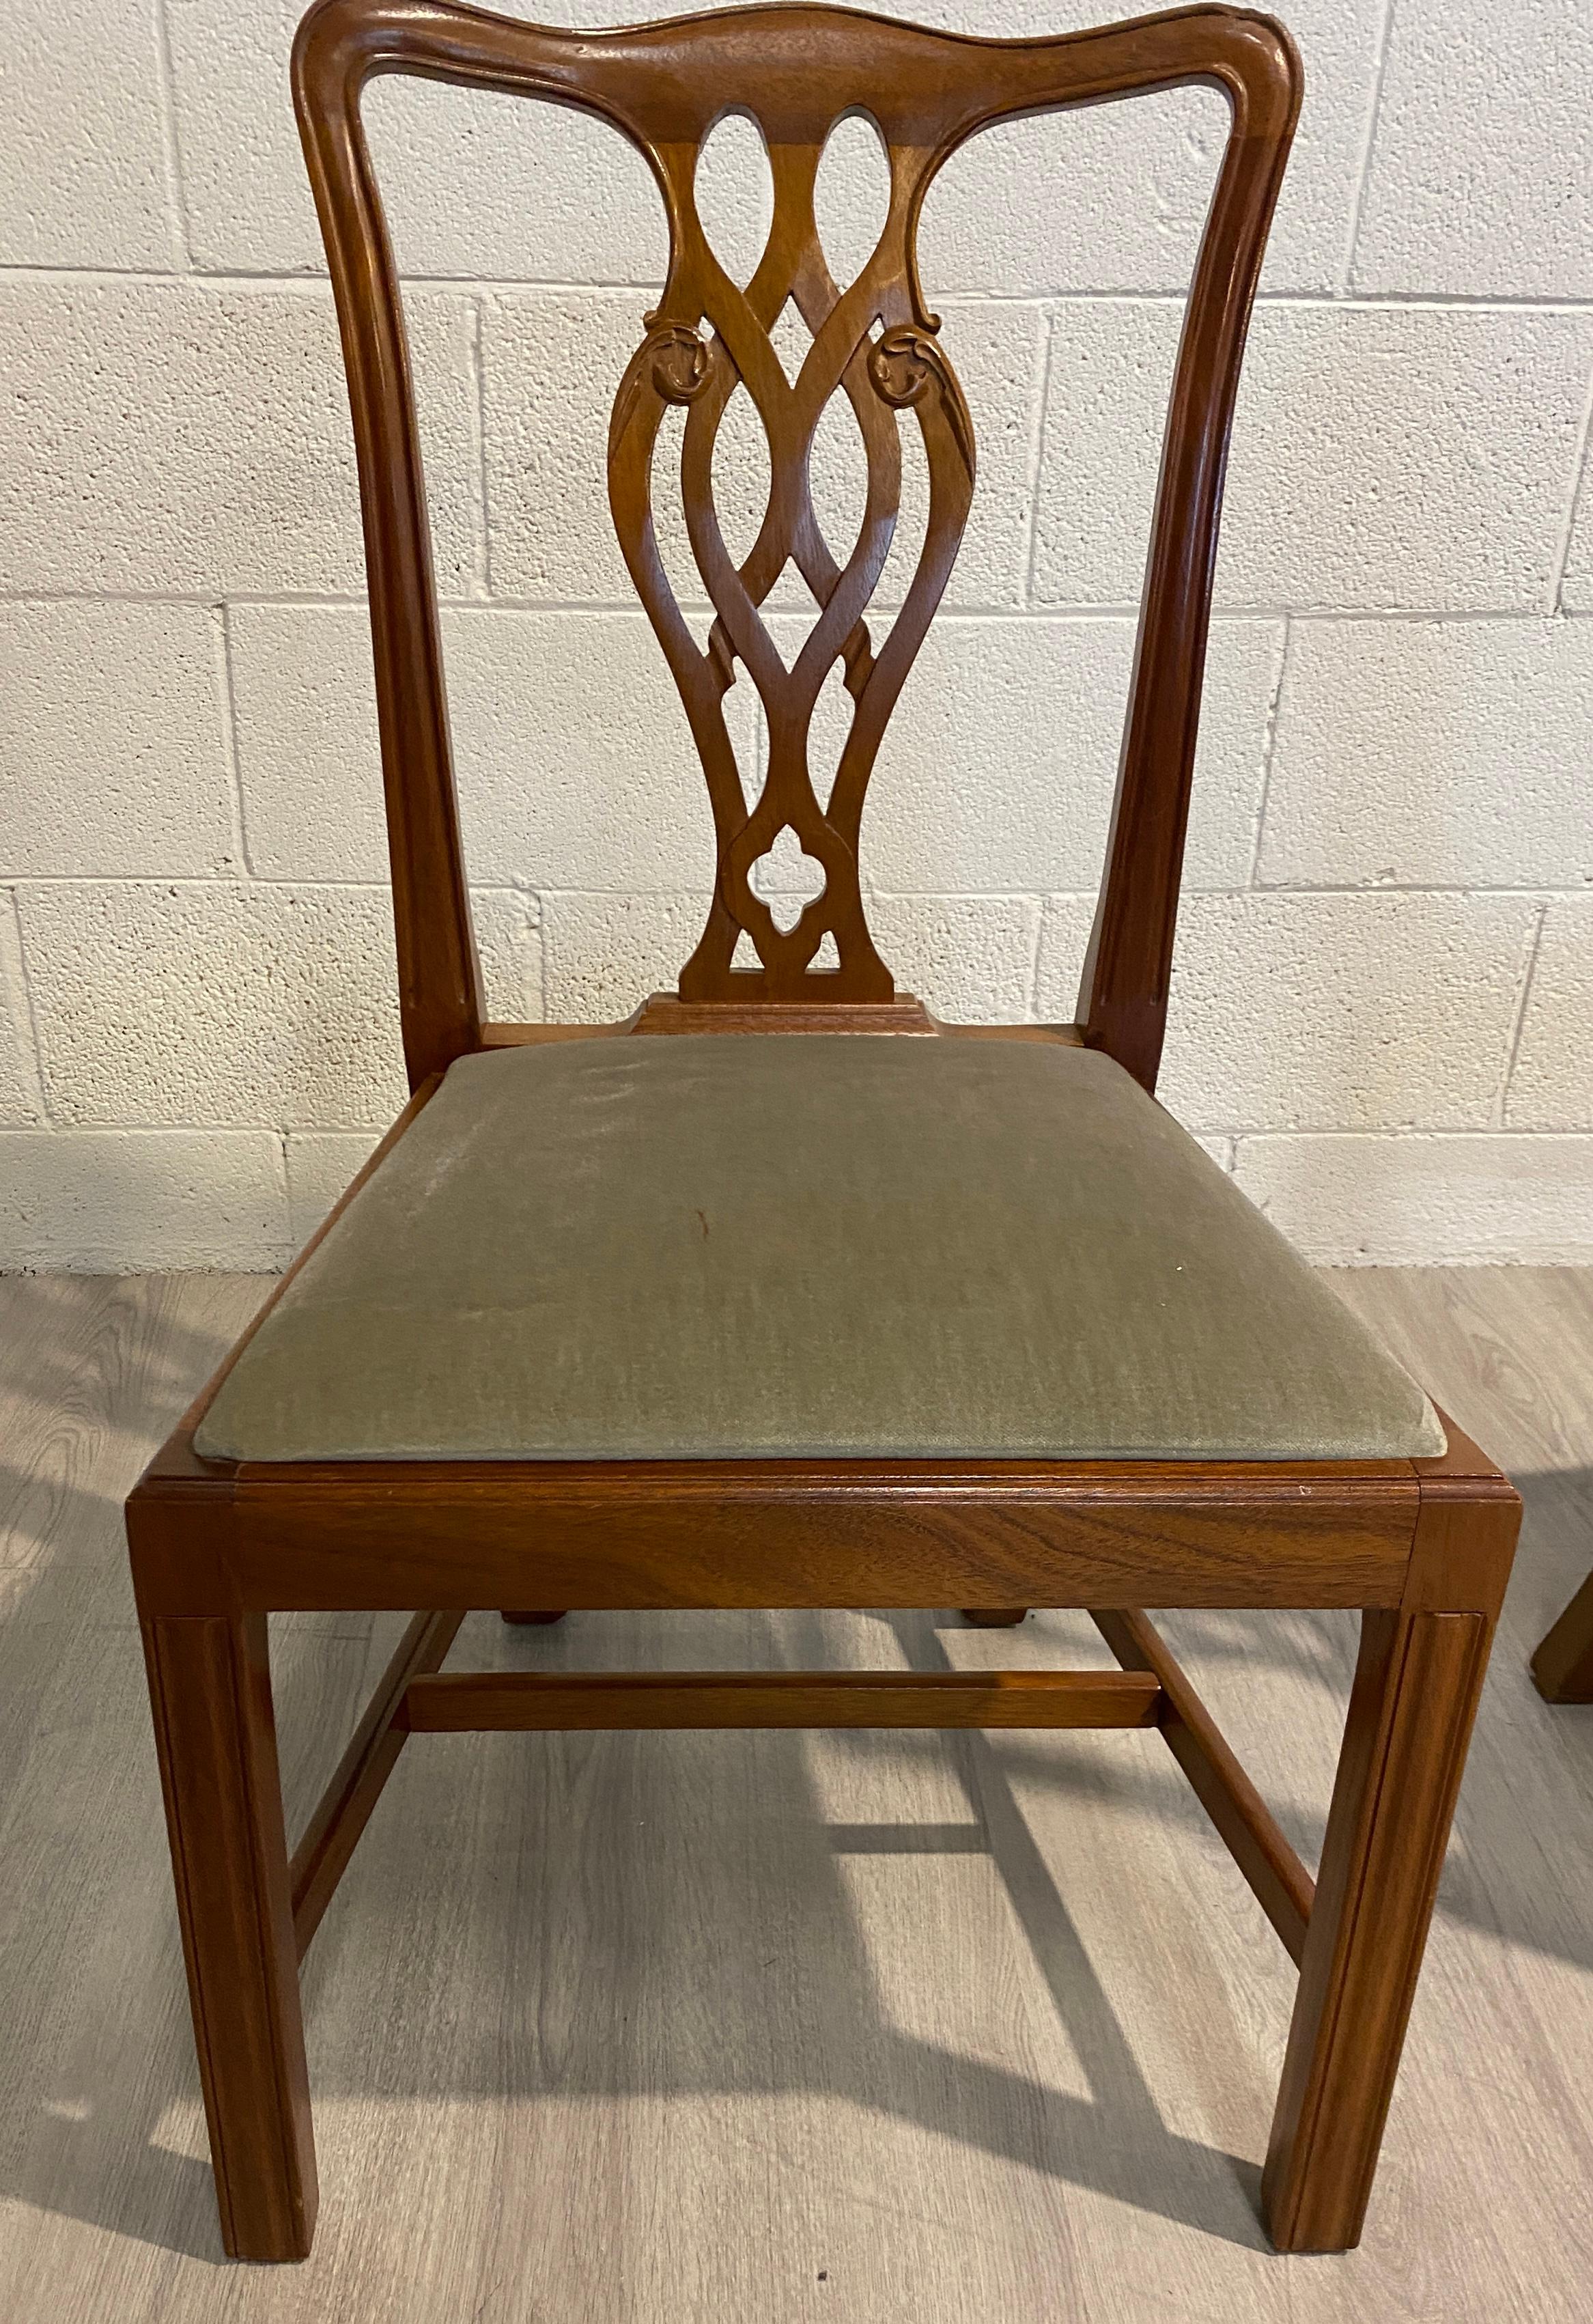 English Dining Chairs, Mahogany, Georgian Style, Made in England, Two Chairs without Arm For Sale